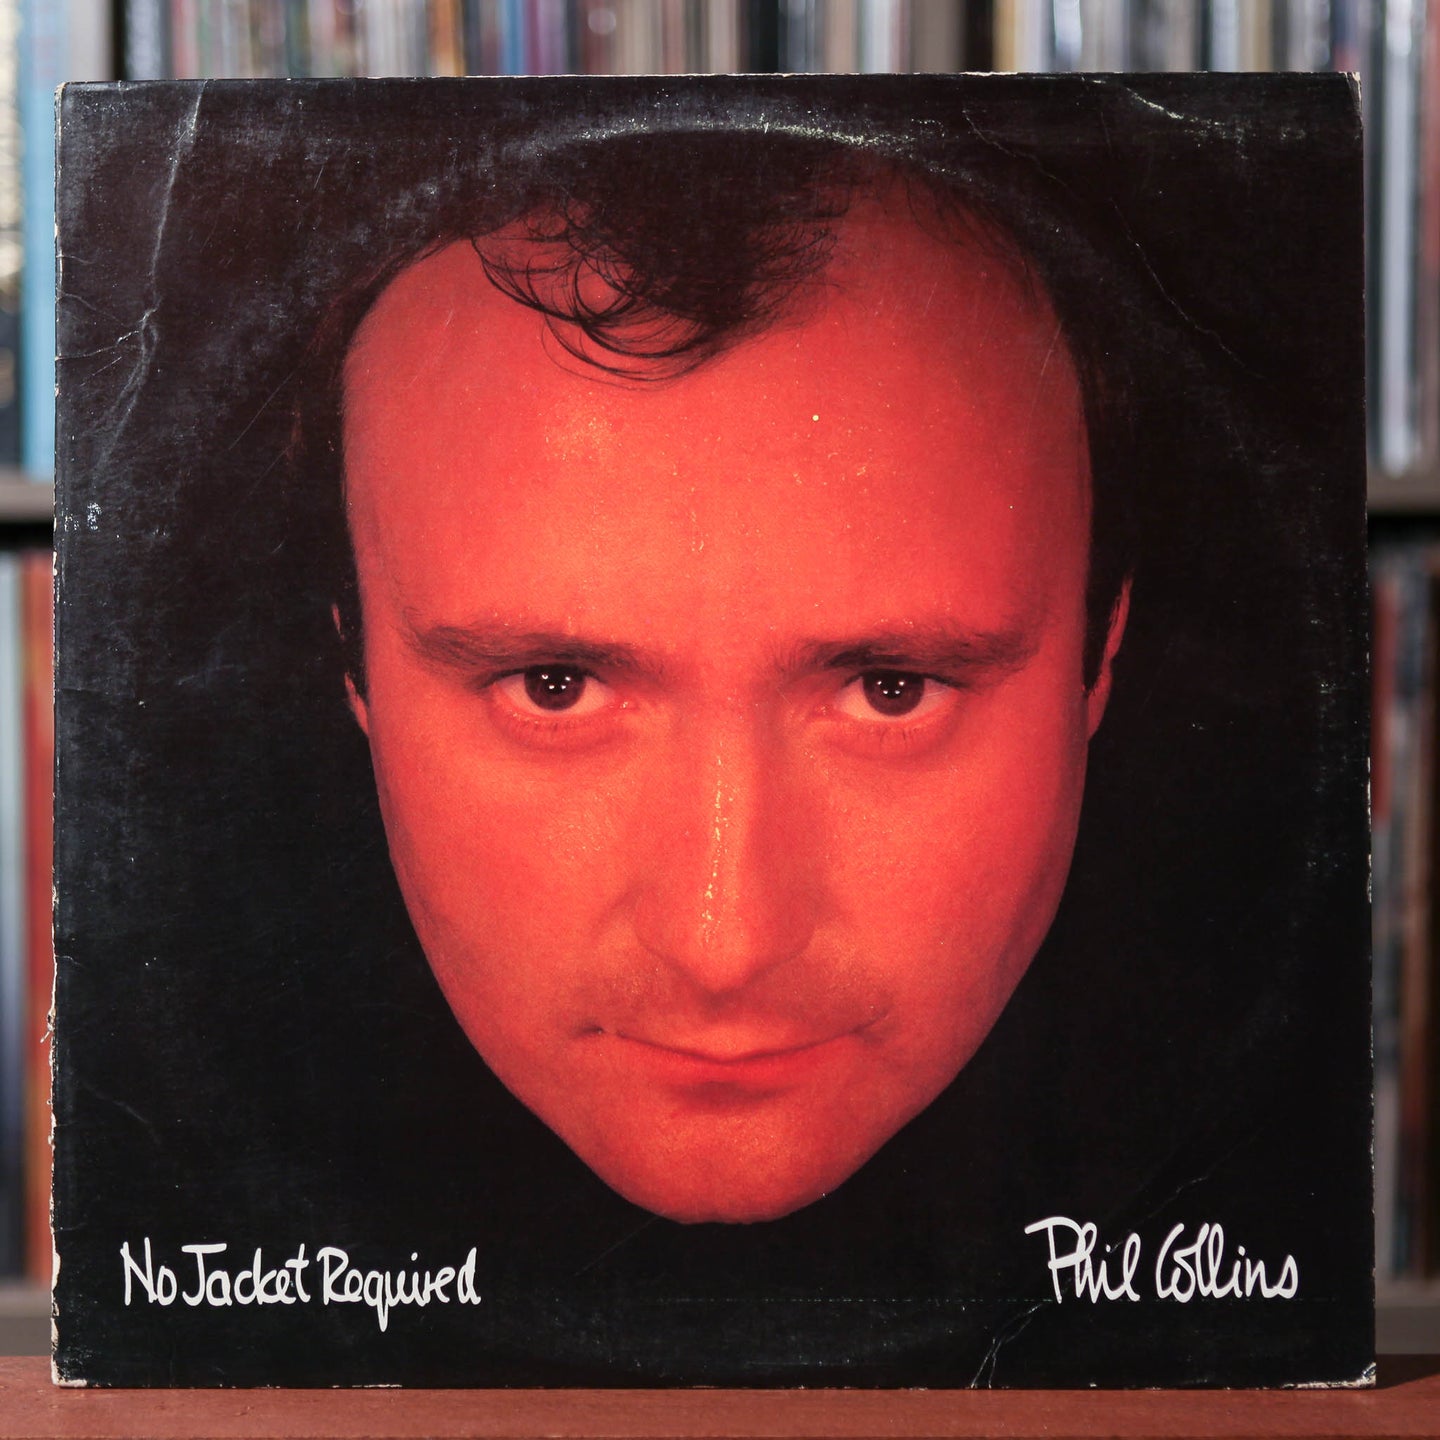 Phil Collins - No Jacket Required - 1985 Atlantic, VG/VG+